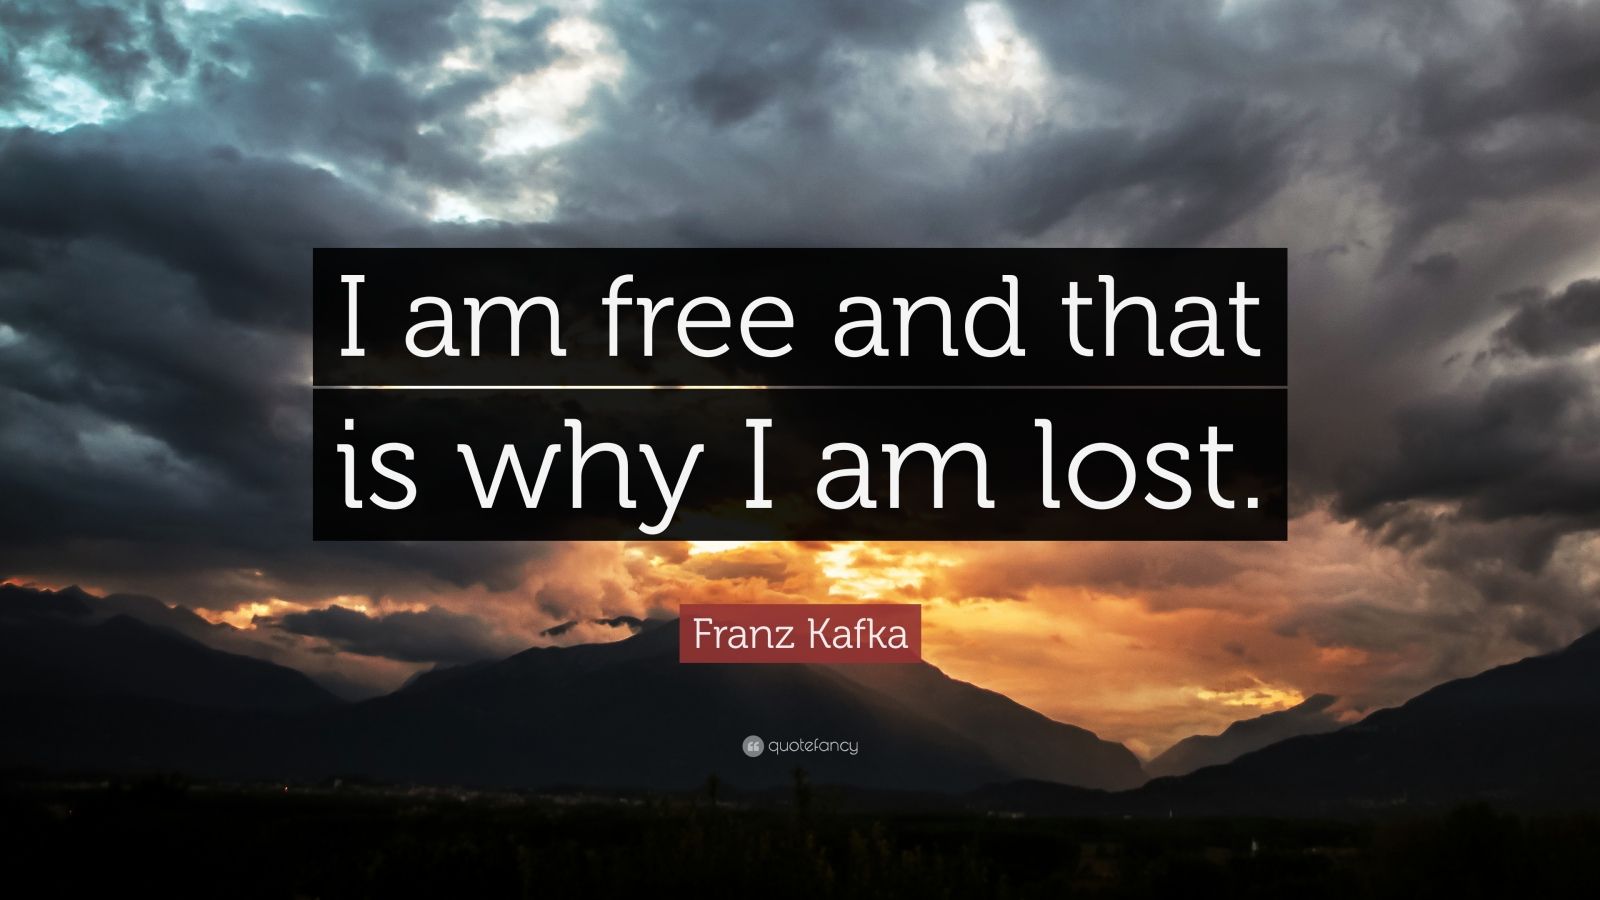 Franz Kafka Quote: "I am free and that is why I am lost ...